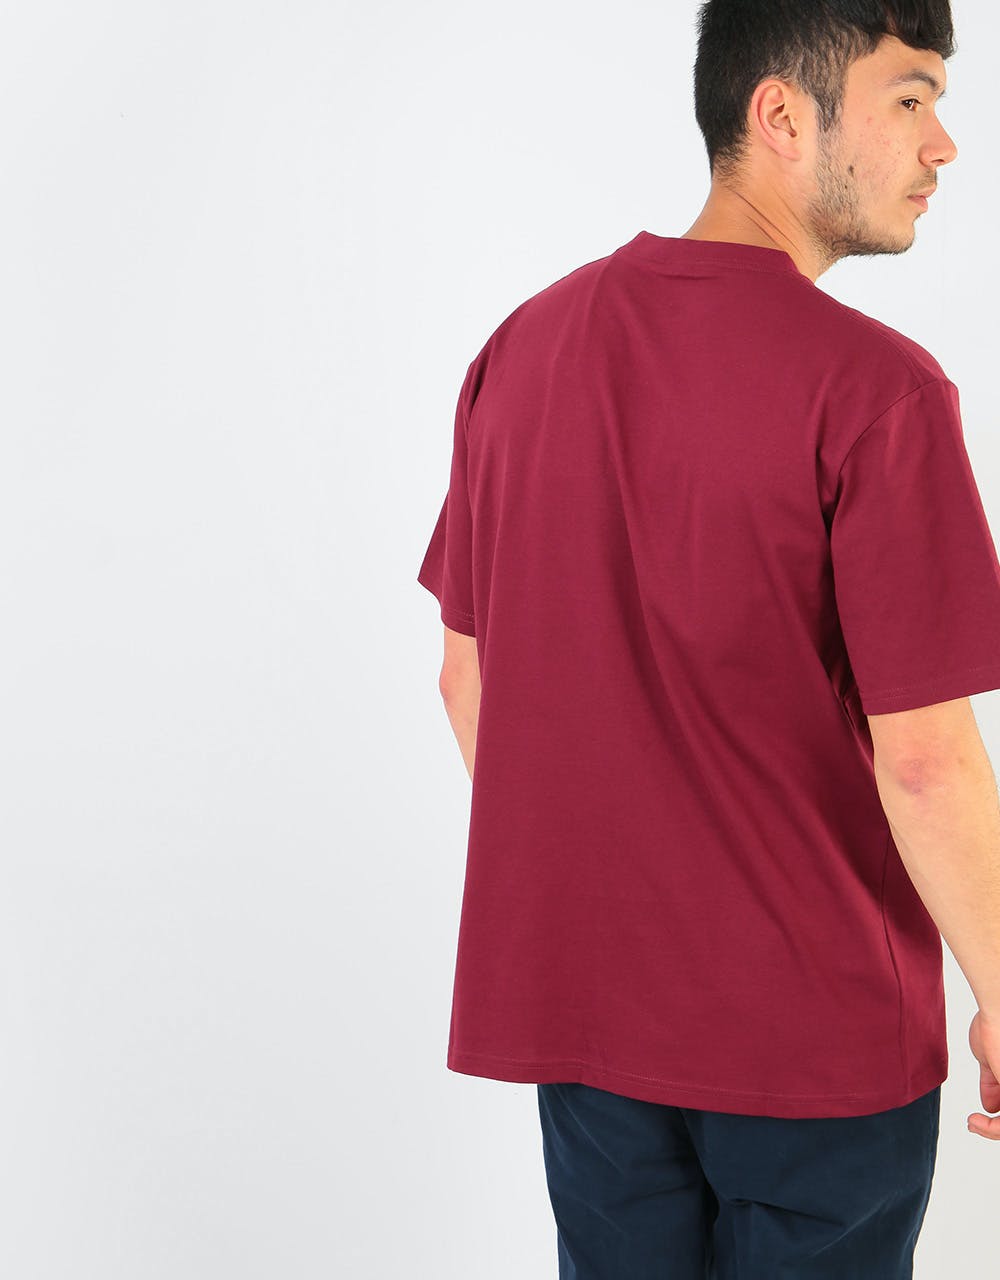 Carhartt WIP S/S College T-Shirt - Mulberry/White